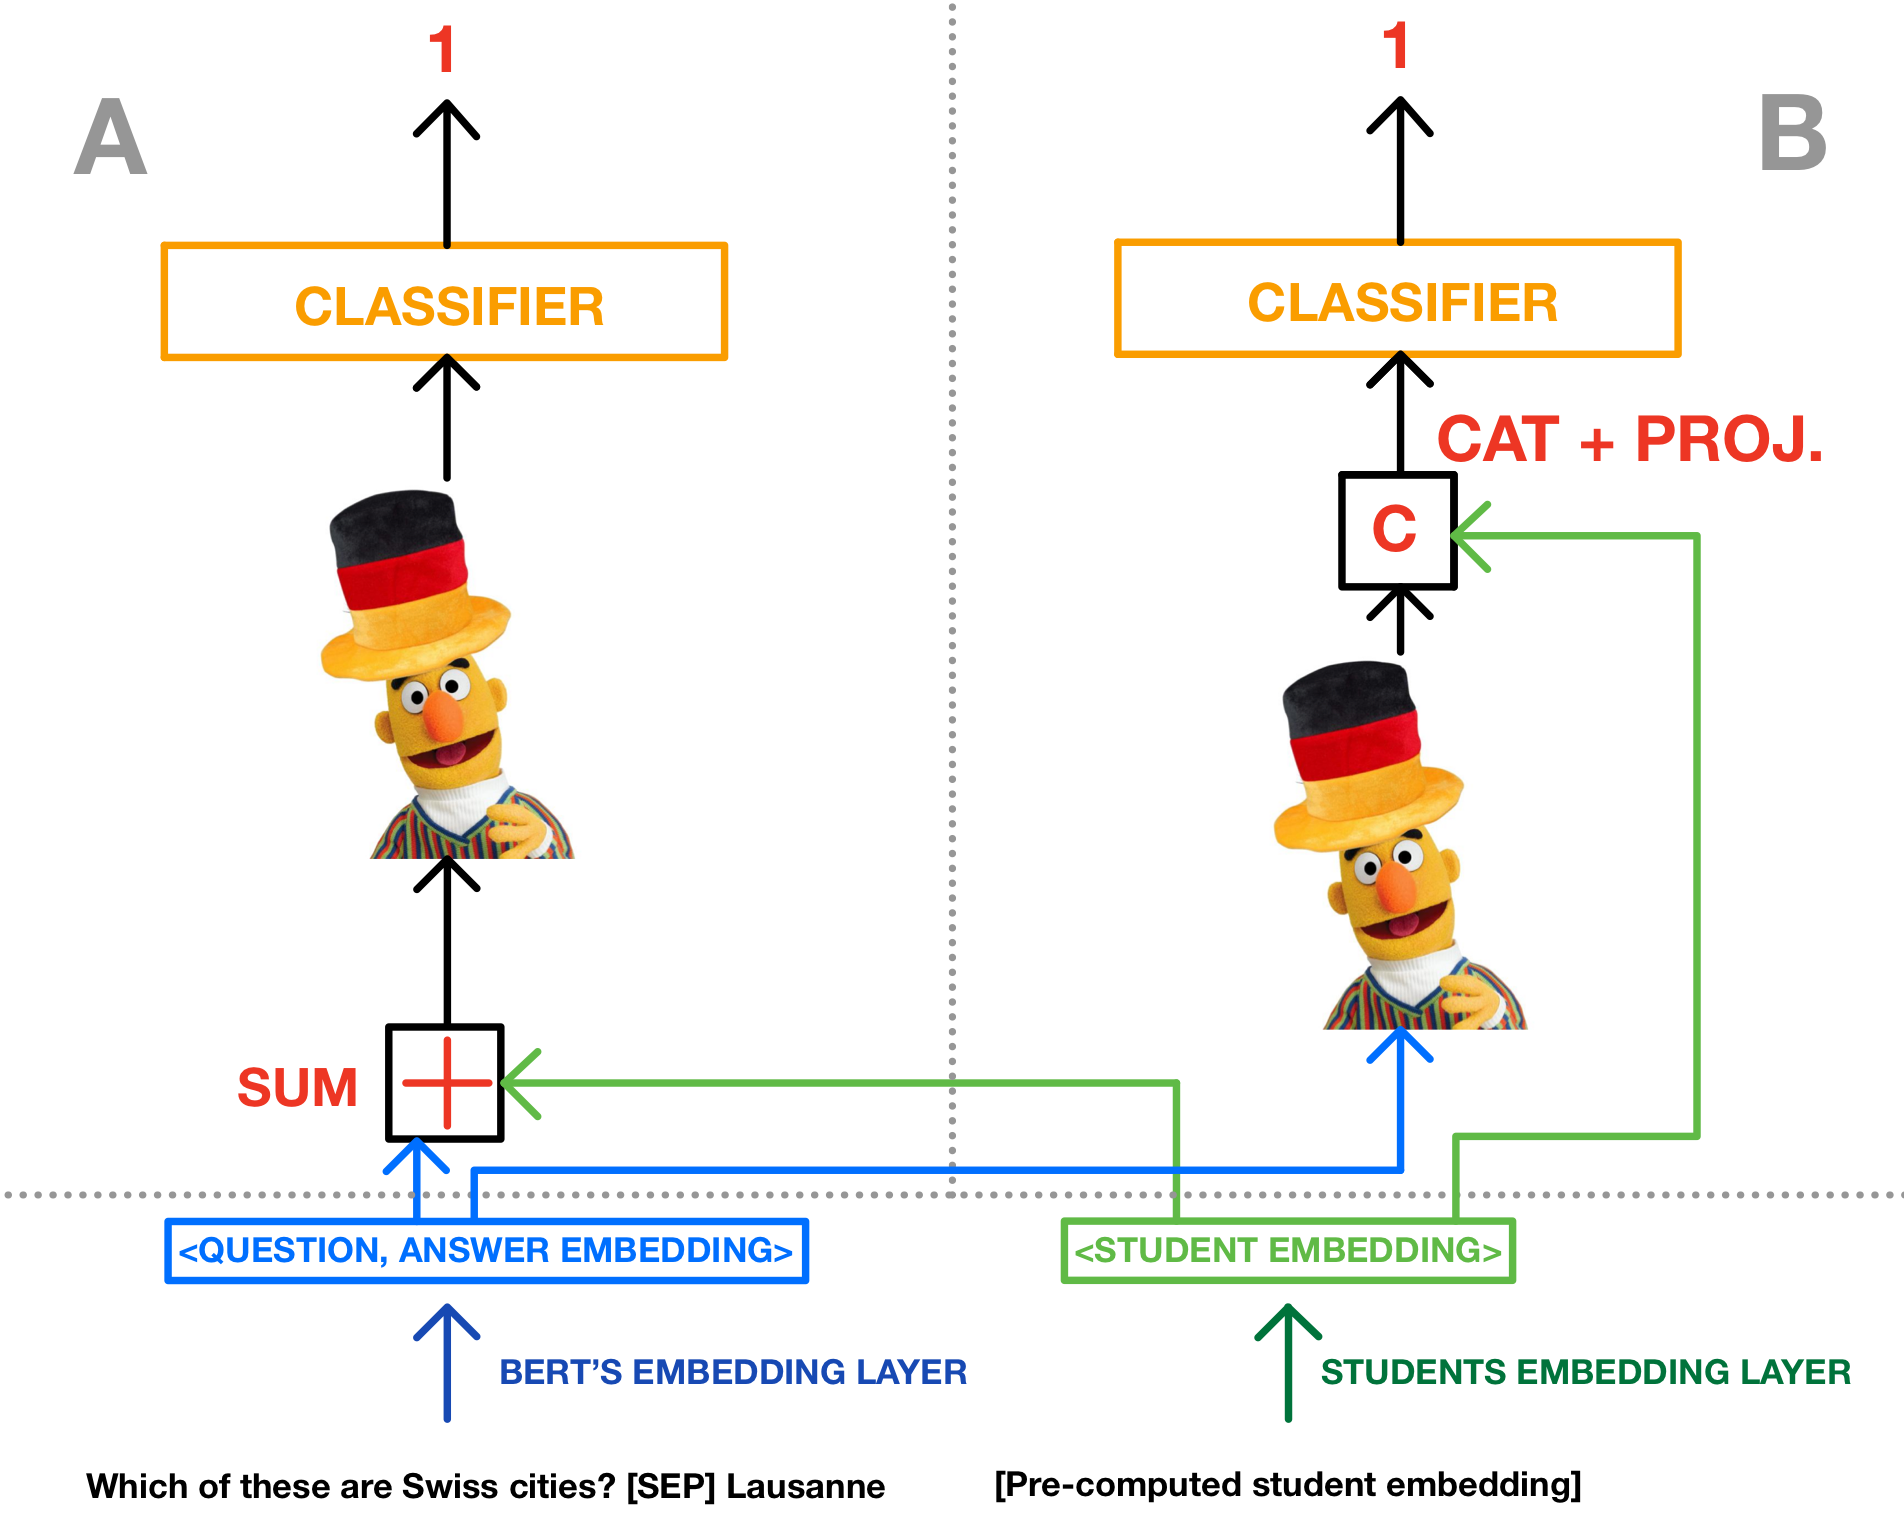 The image shows two architectures for multiple-choice question (MCQ) models: MCQStudentBertSum (A) and MCQStudentBertCat (B). Both architectures include a diagram of a puppet figure, with arrows indicating the flow of embeddings. 